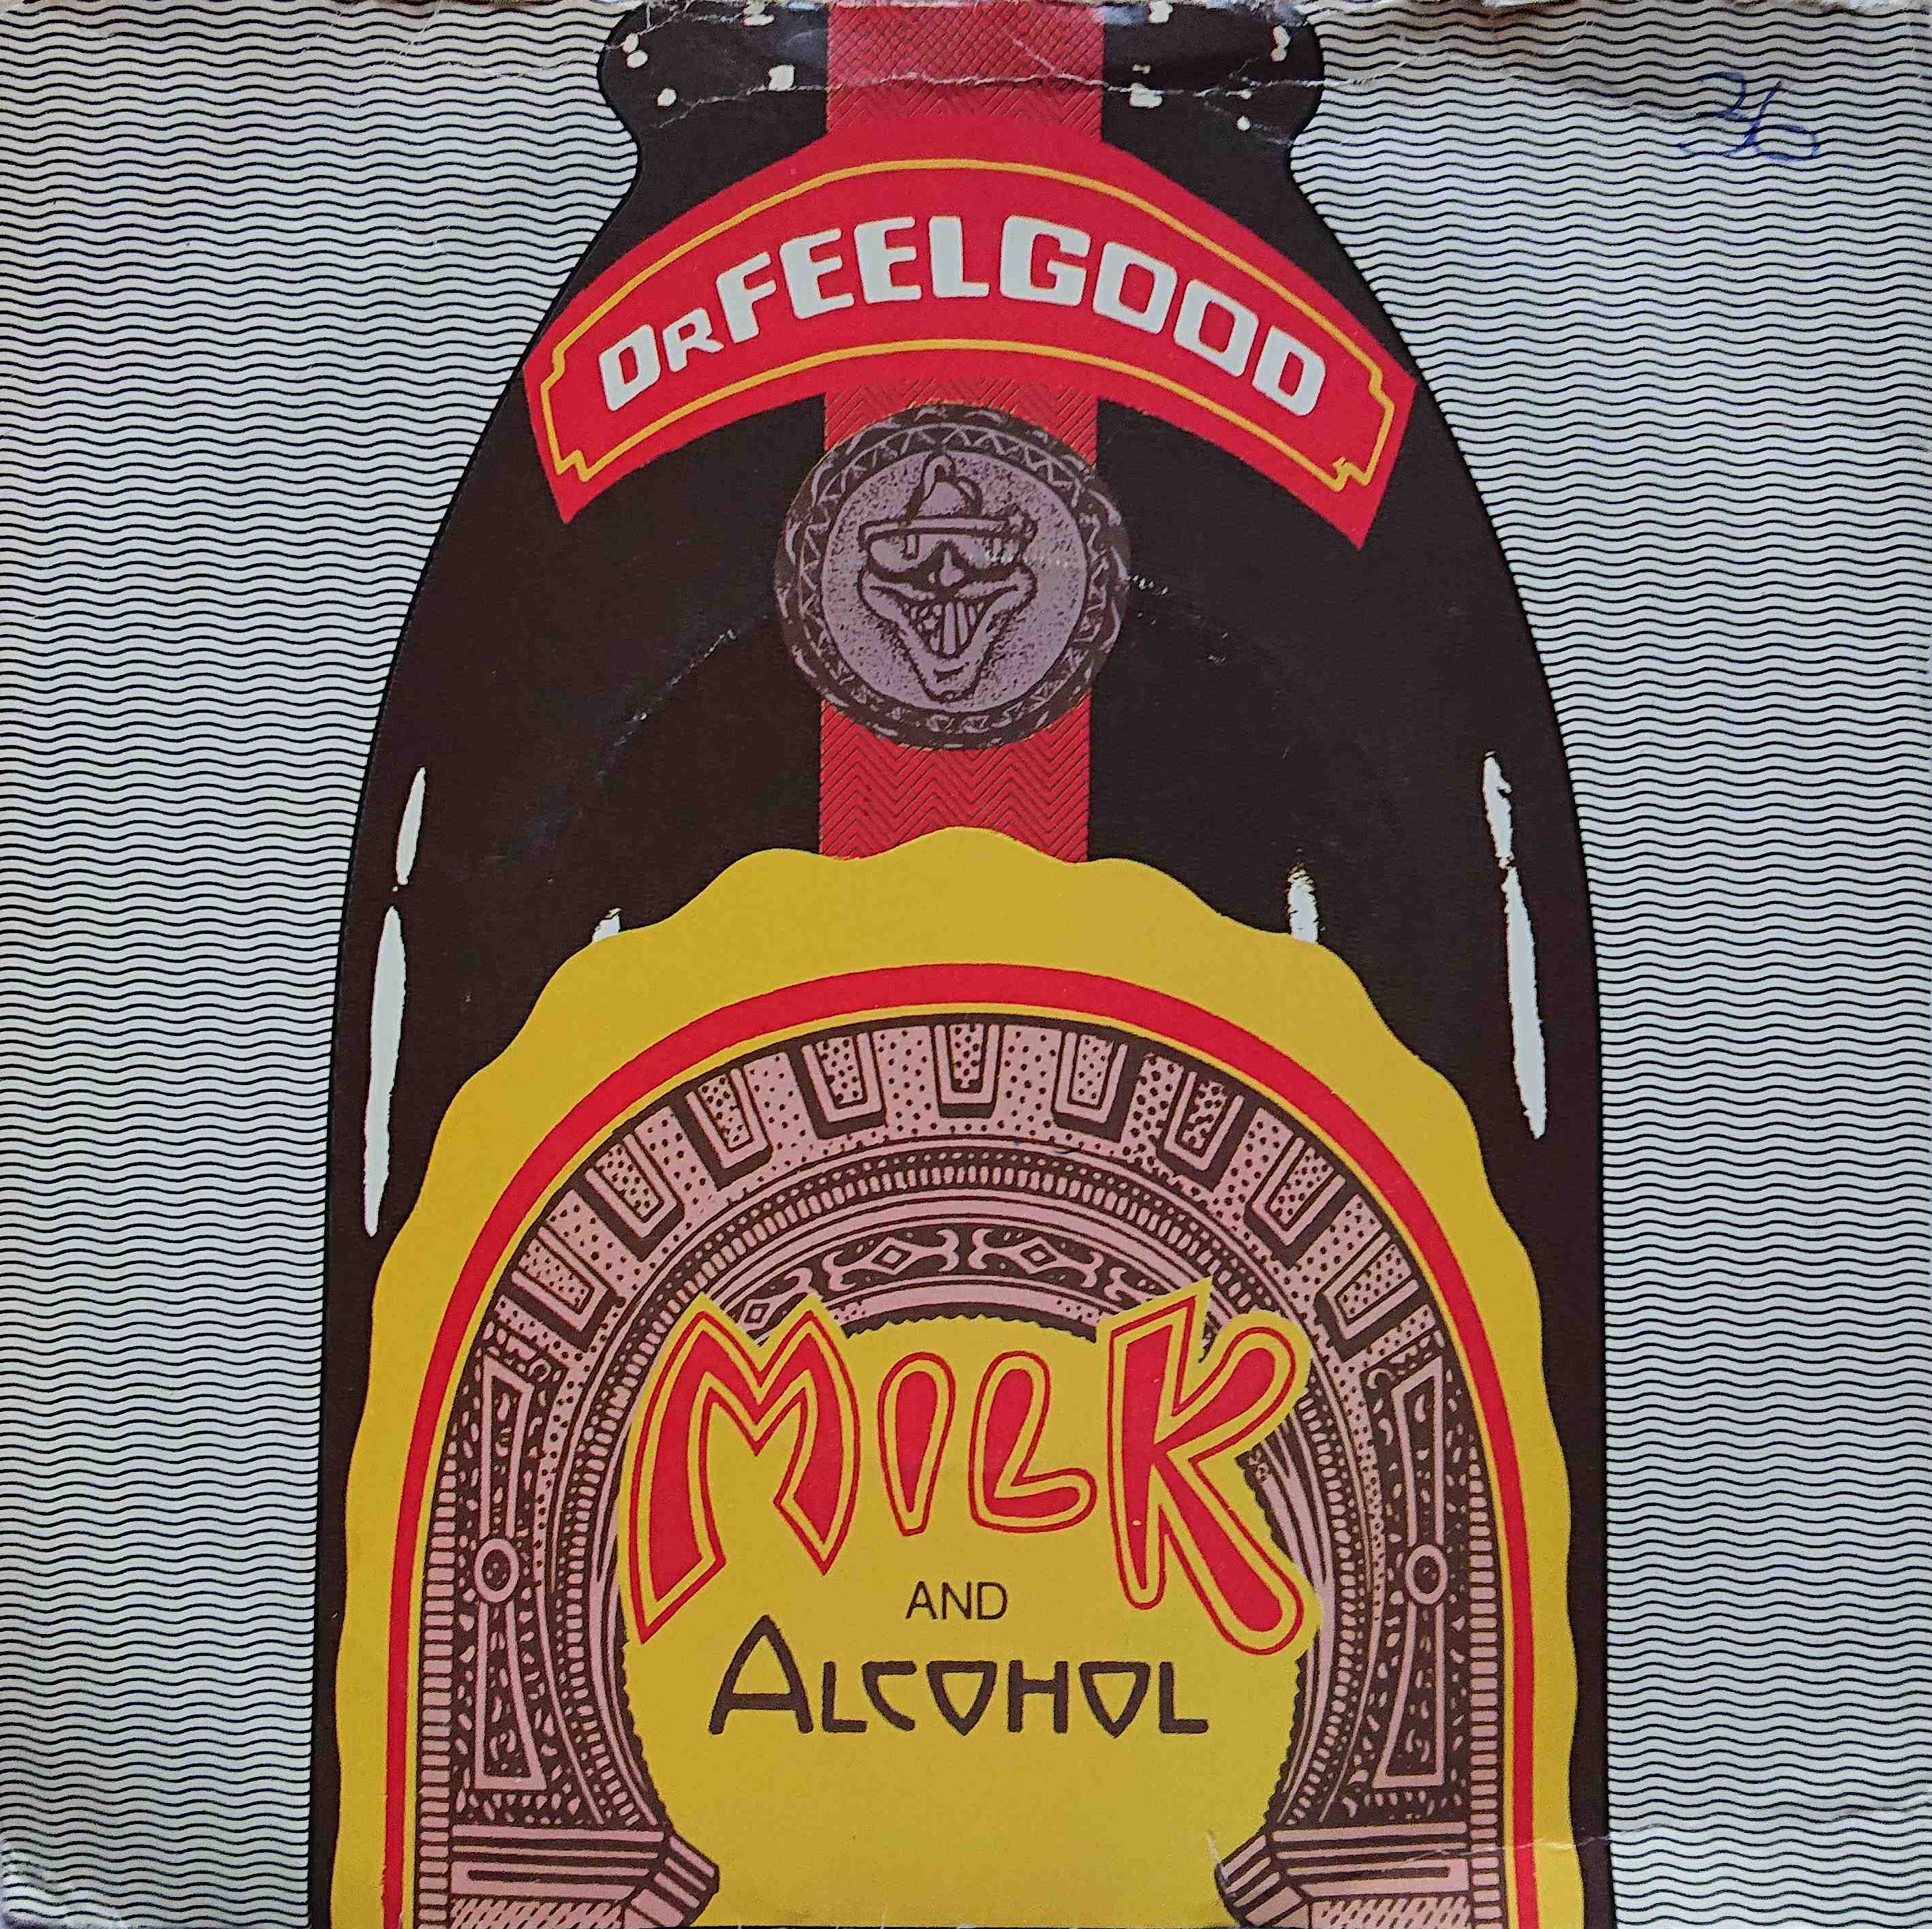 Picture of UP 36468 Milk and alcohol by artist Lowe / Mayo / Brilleaux / Dr Feelgood 